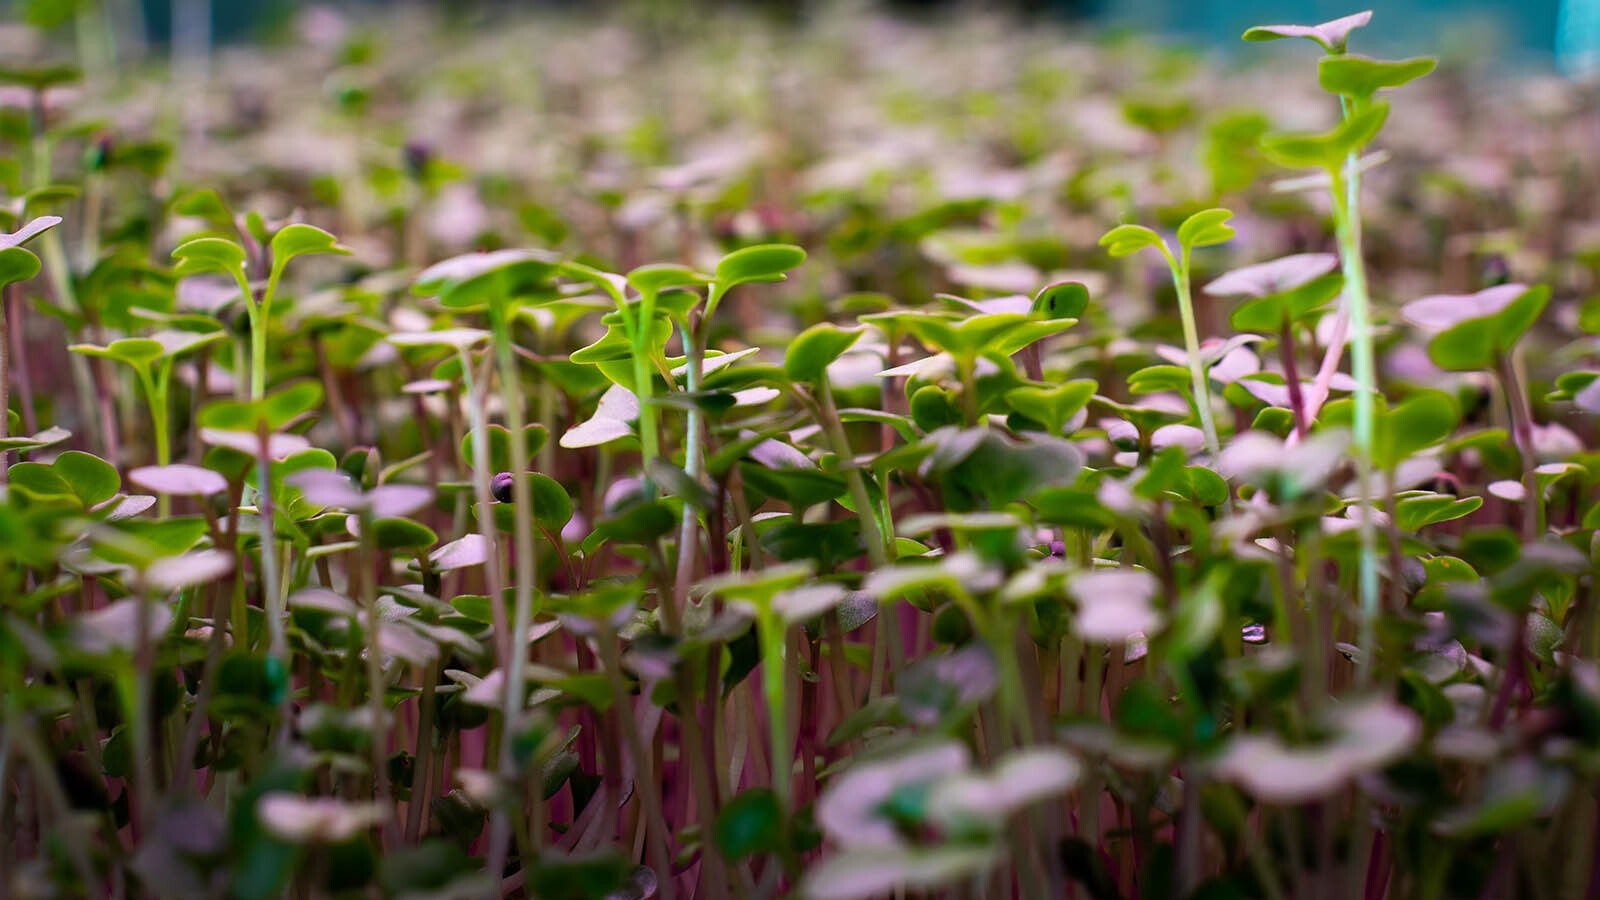 Along with many varieties of mushrooms, Webster Mycology also raises micro greens, like this tray of basic salad mix microgreens.